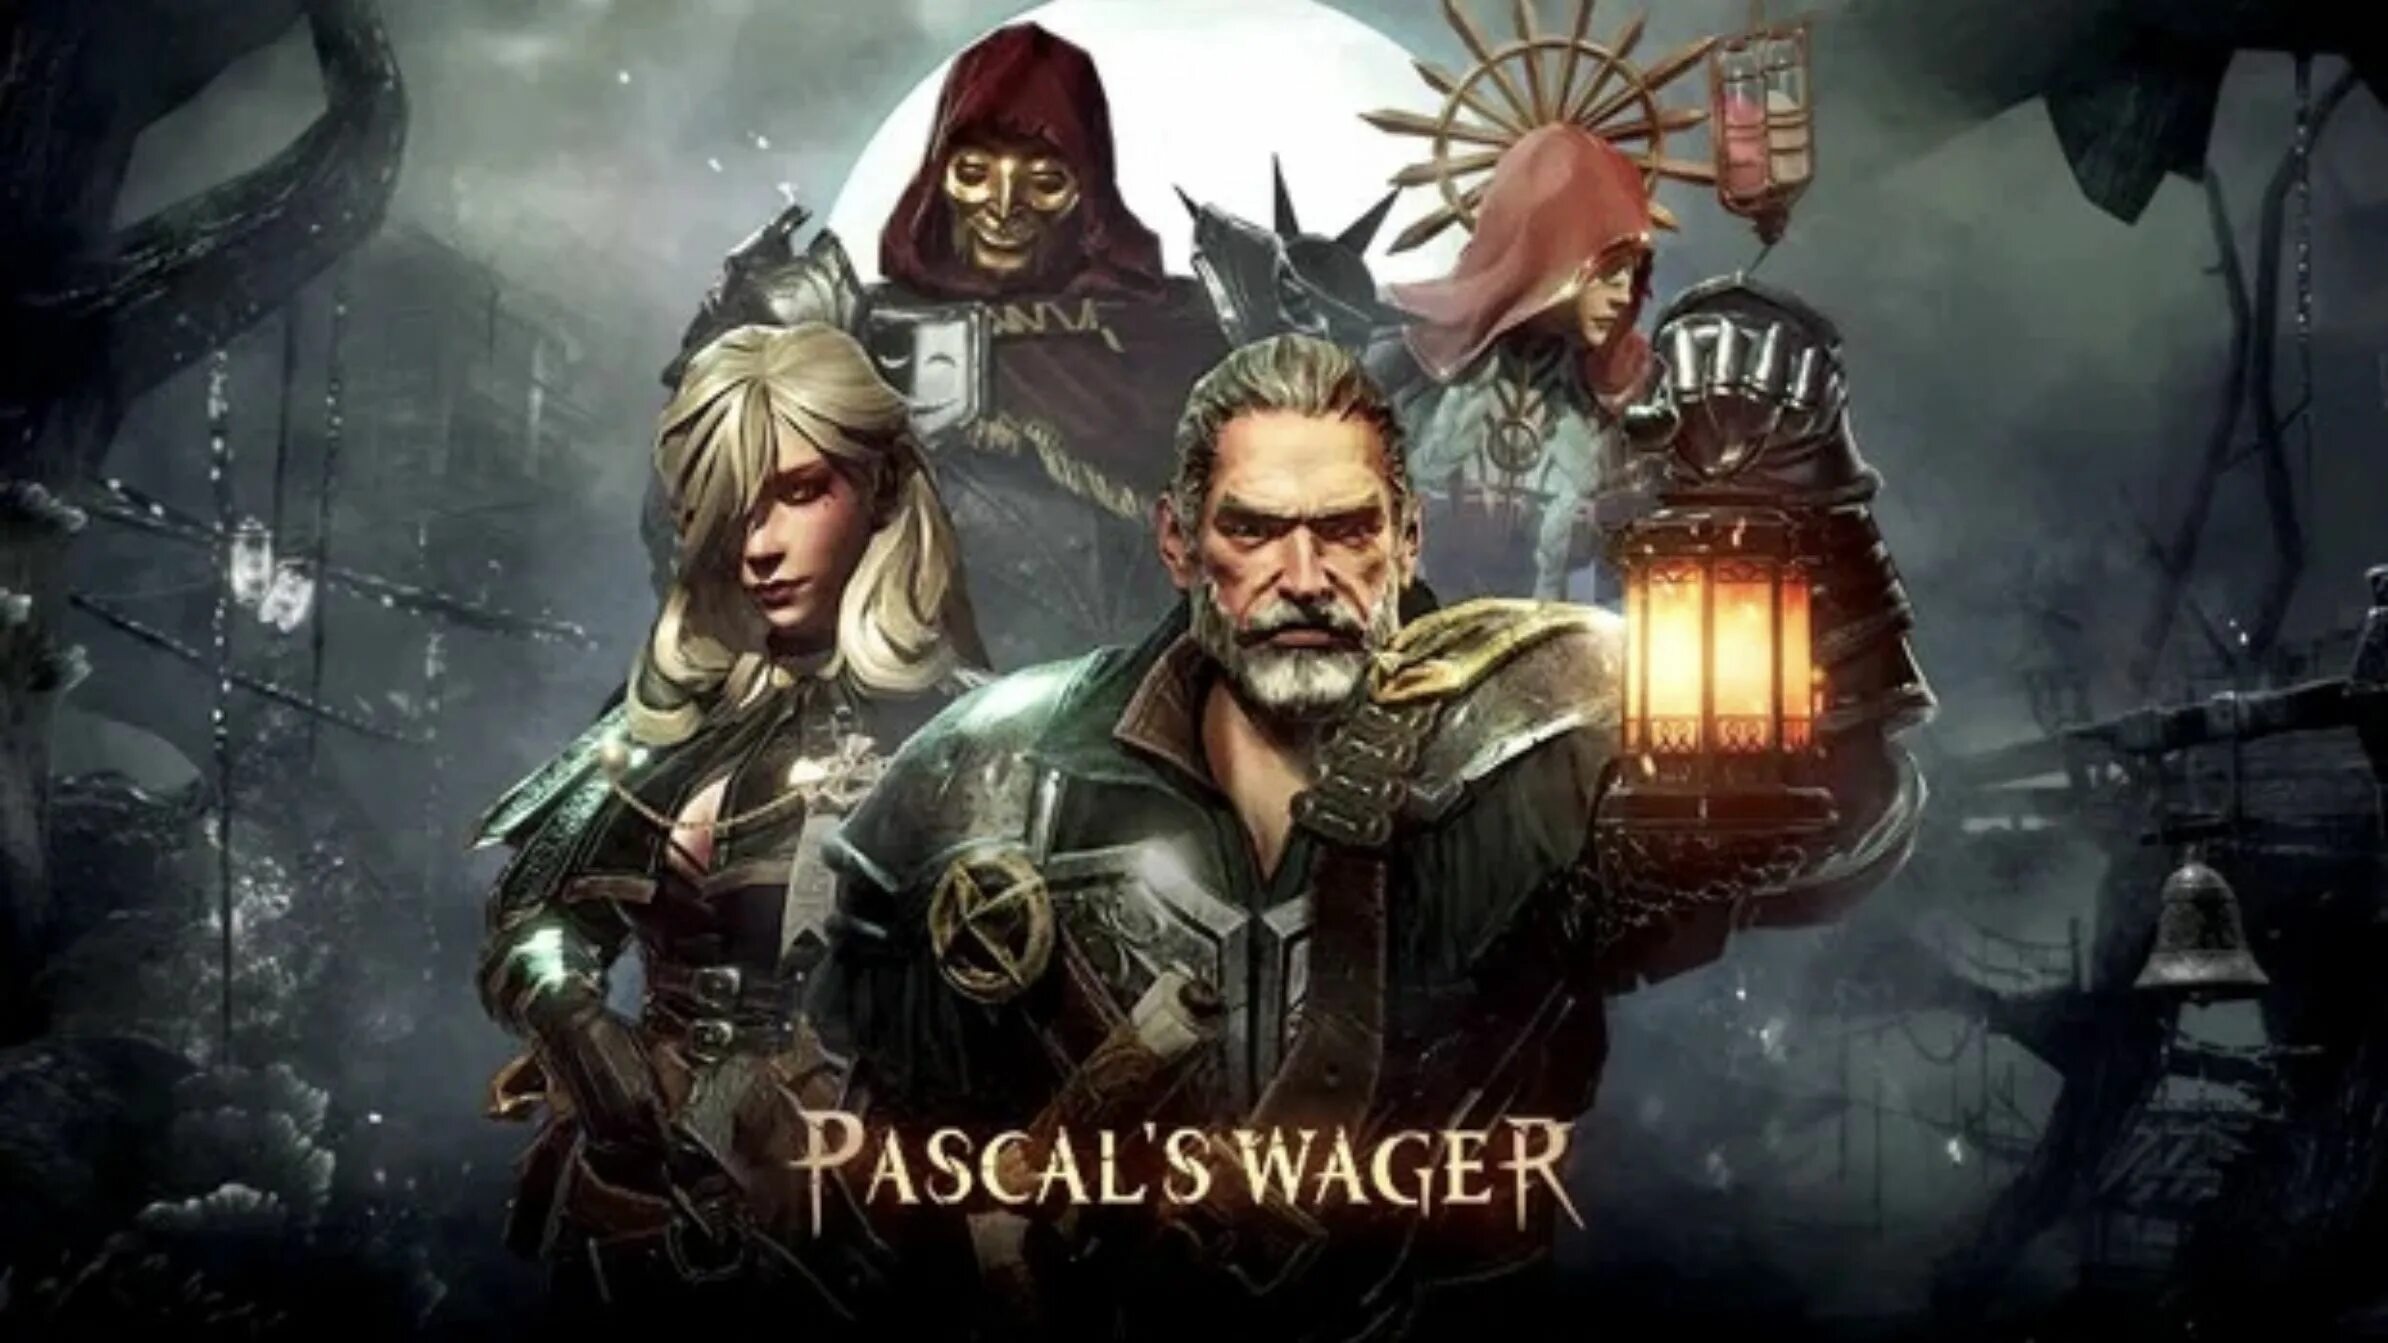 Pascal s wager definitive. Pascal's Wager: Definitive Edition. Pascal Wager Android. Pascal's Wager на ПК. Pascal's Wager Definitive Edition Нинтендо.